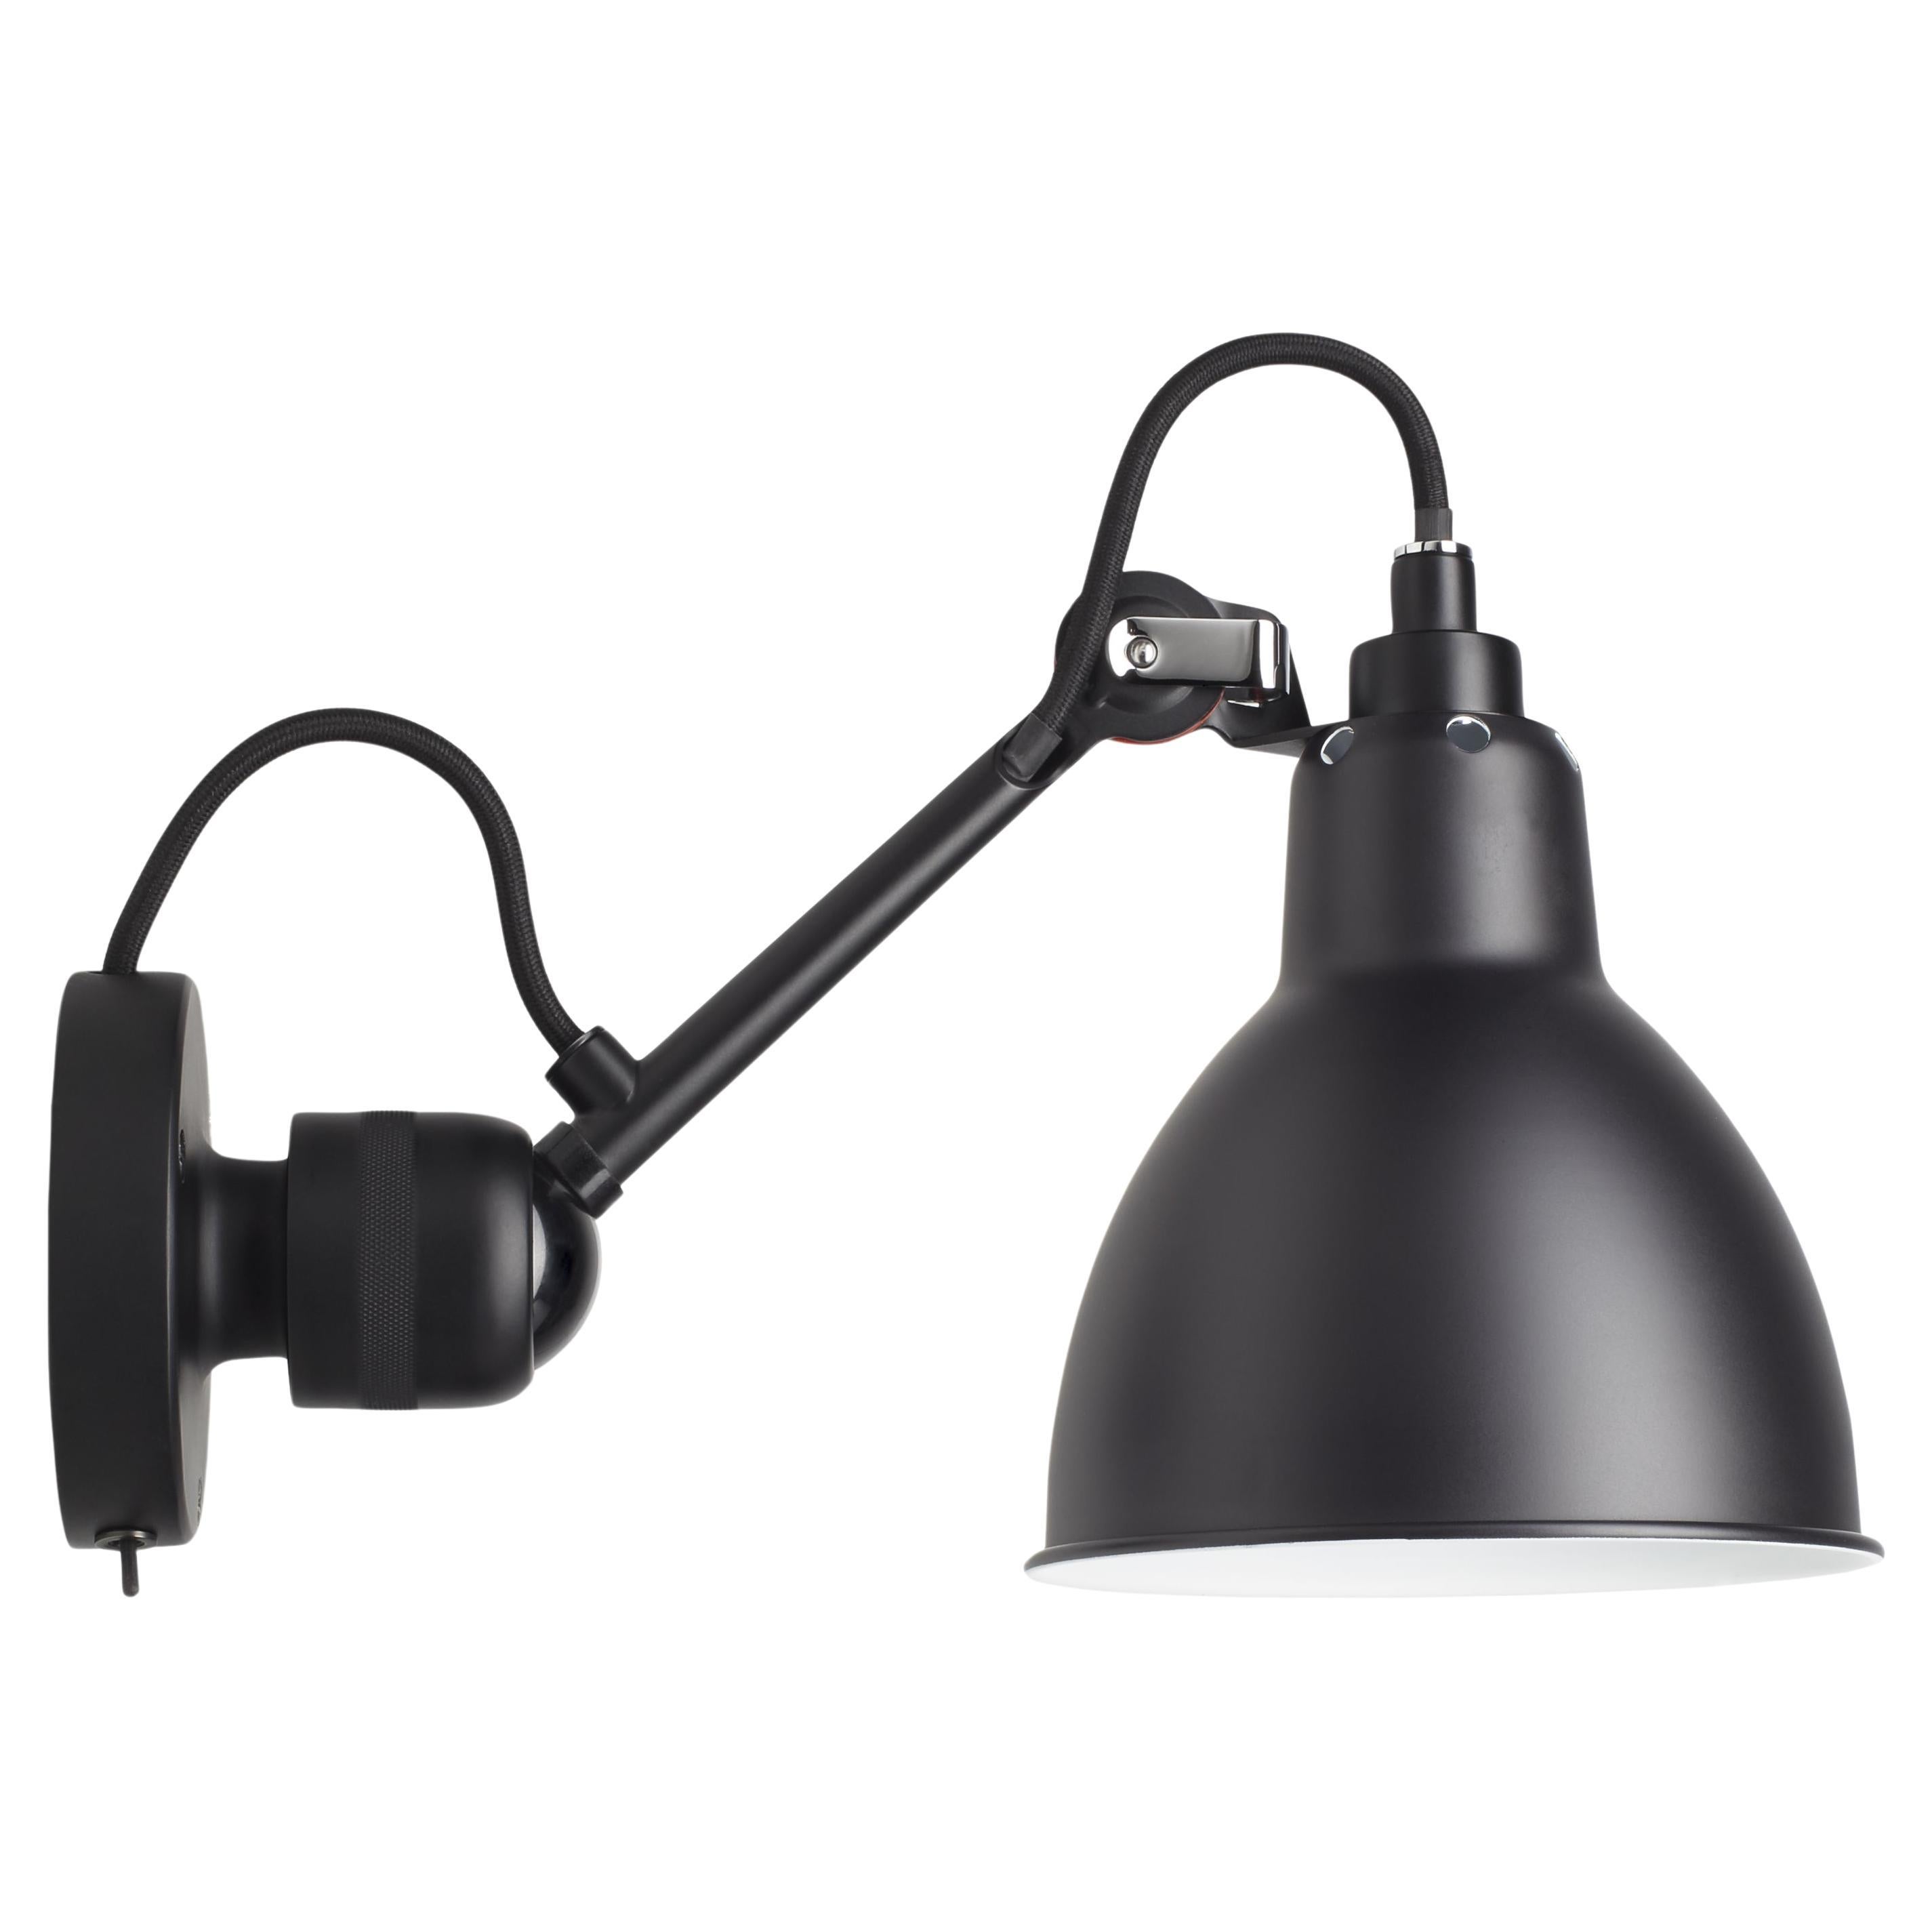 DCW Editions La Lampe Gras N°304 SW Wall Lamp in Black Arm and Black Shade For Sale